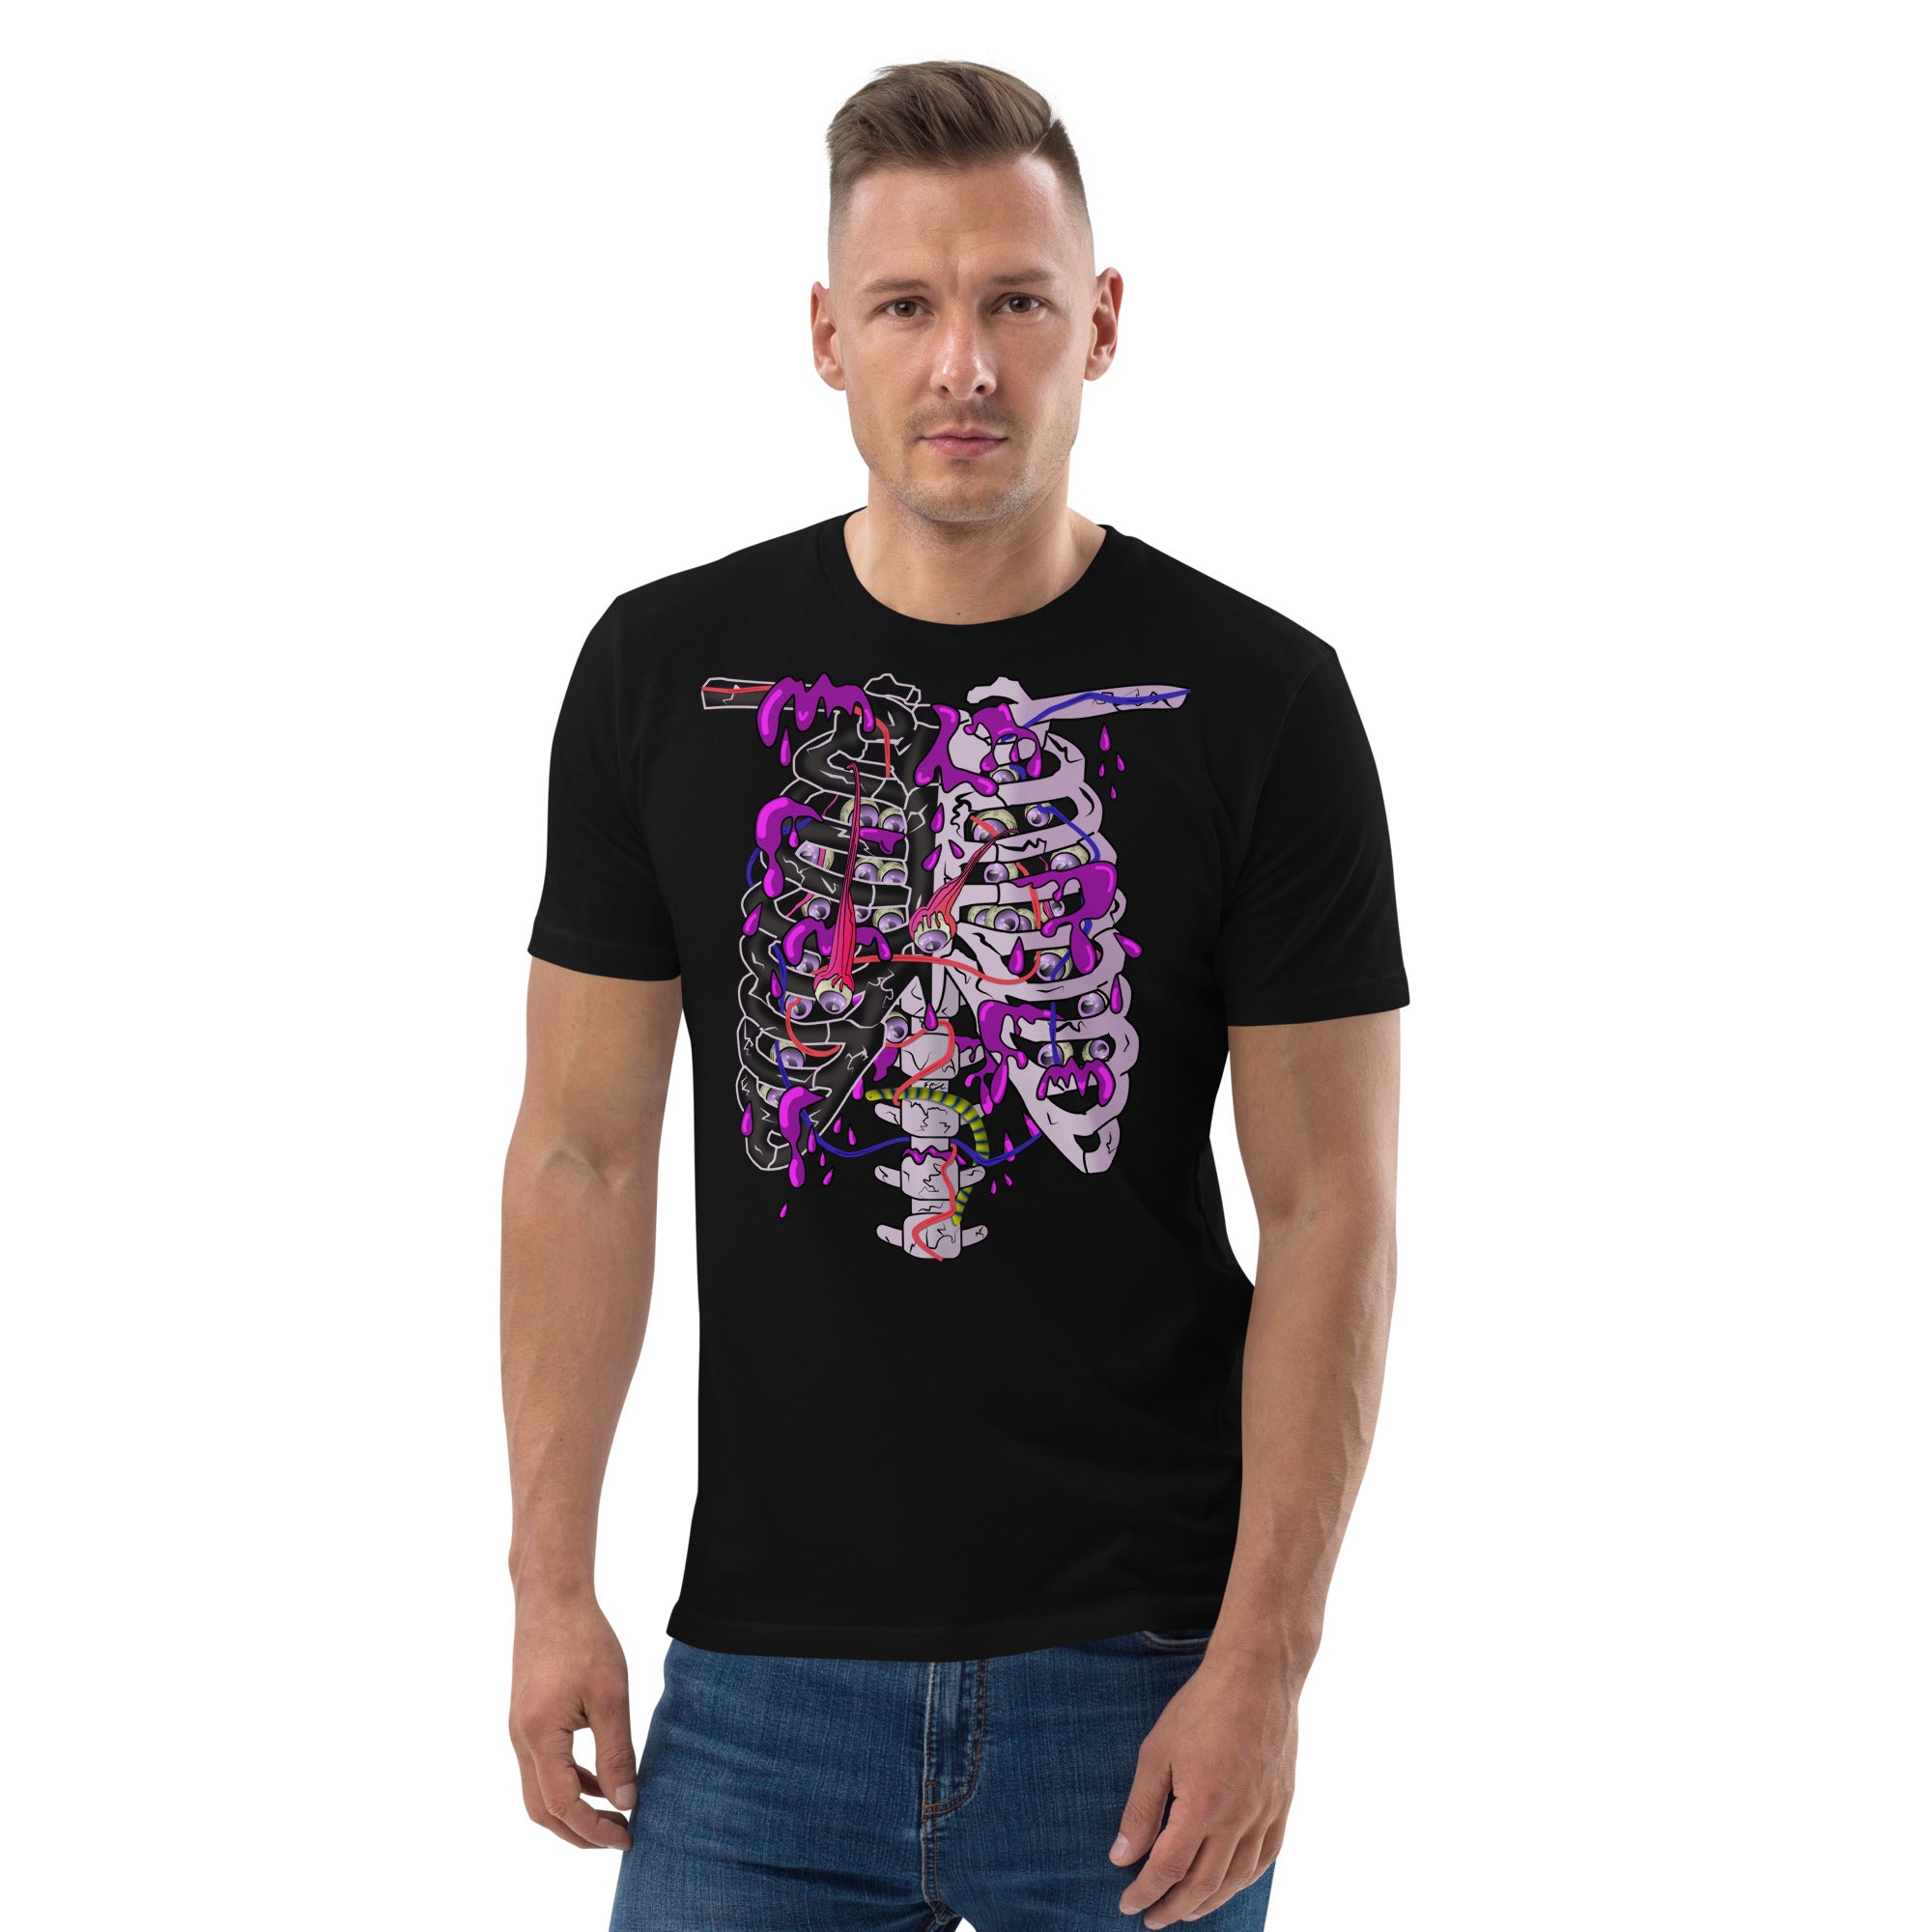 Creepy cute skeleton rib cage shirt in organic cotton. PETA approved fun yami kawaii harajuku style anime art graphic tee with dripping gore and filled with scary eyeballs. Decay and spooky halloween y2k grunge costume for party and streetwear.